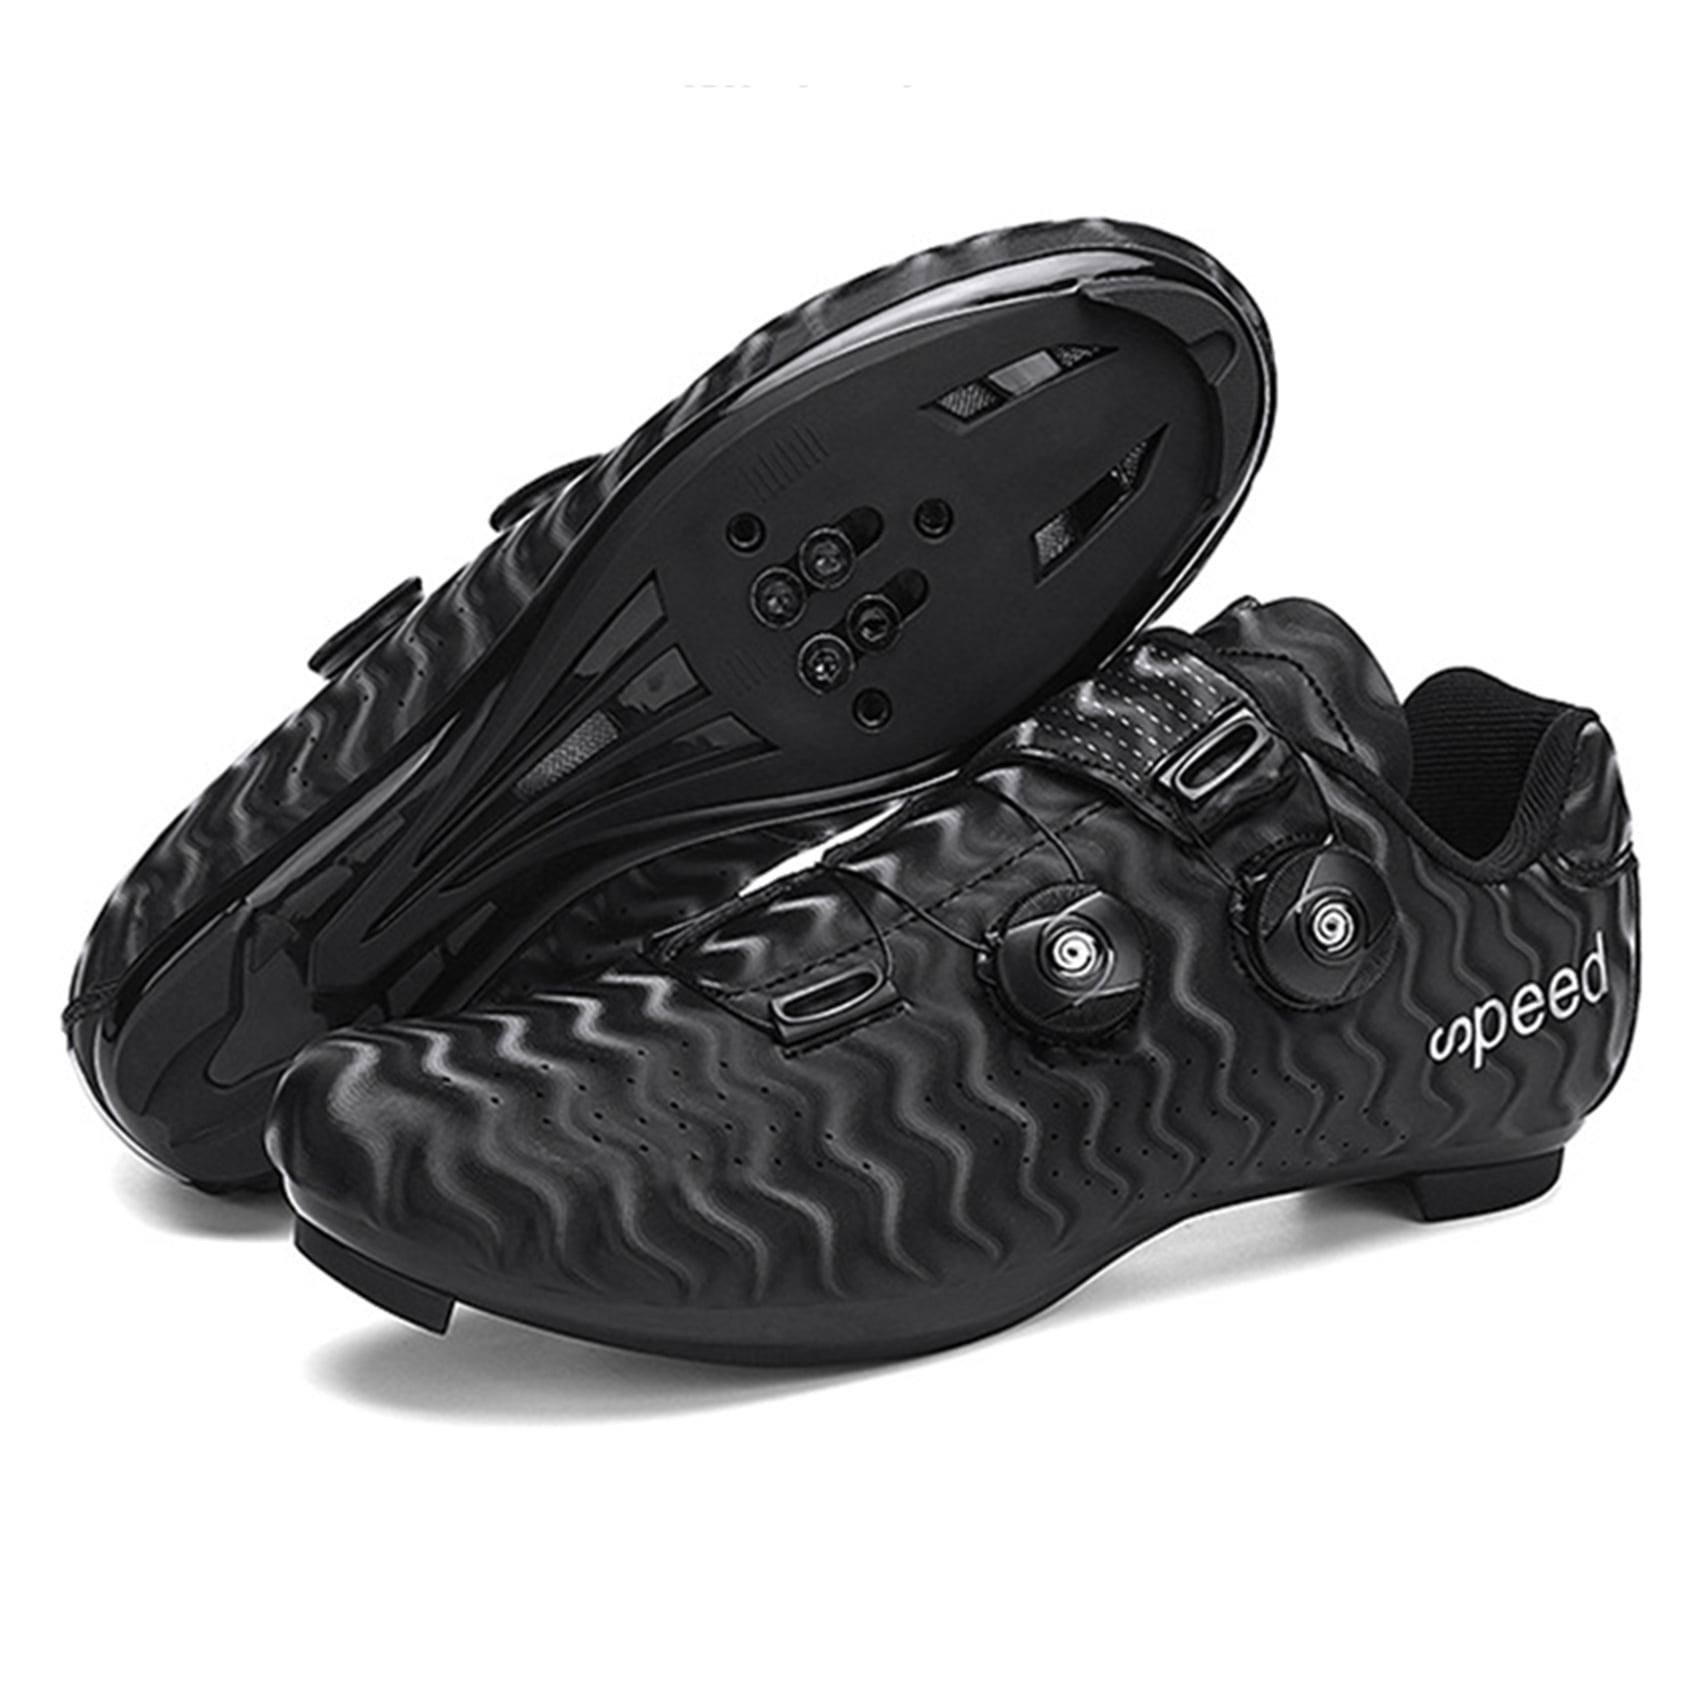 Professional Men Cycling Shoes Spin Peloton Riding Road SPD Bike Sports Sneakers 